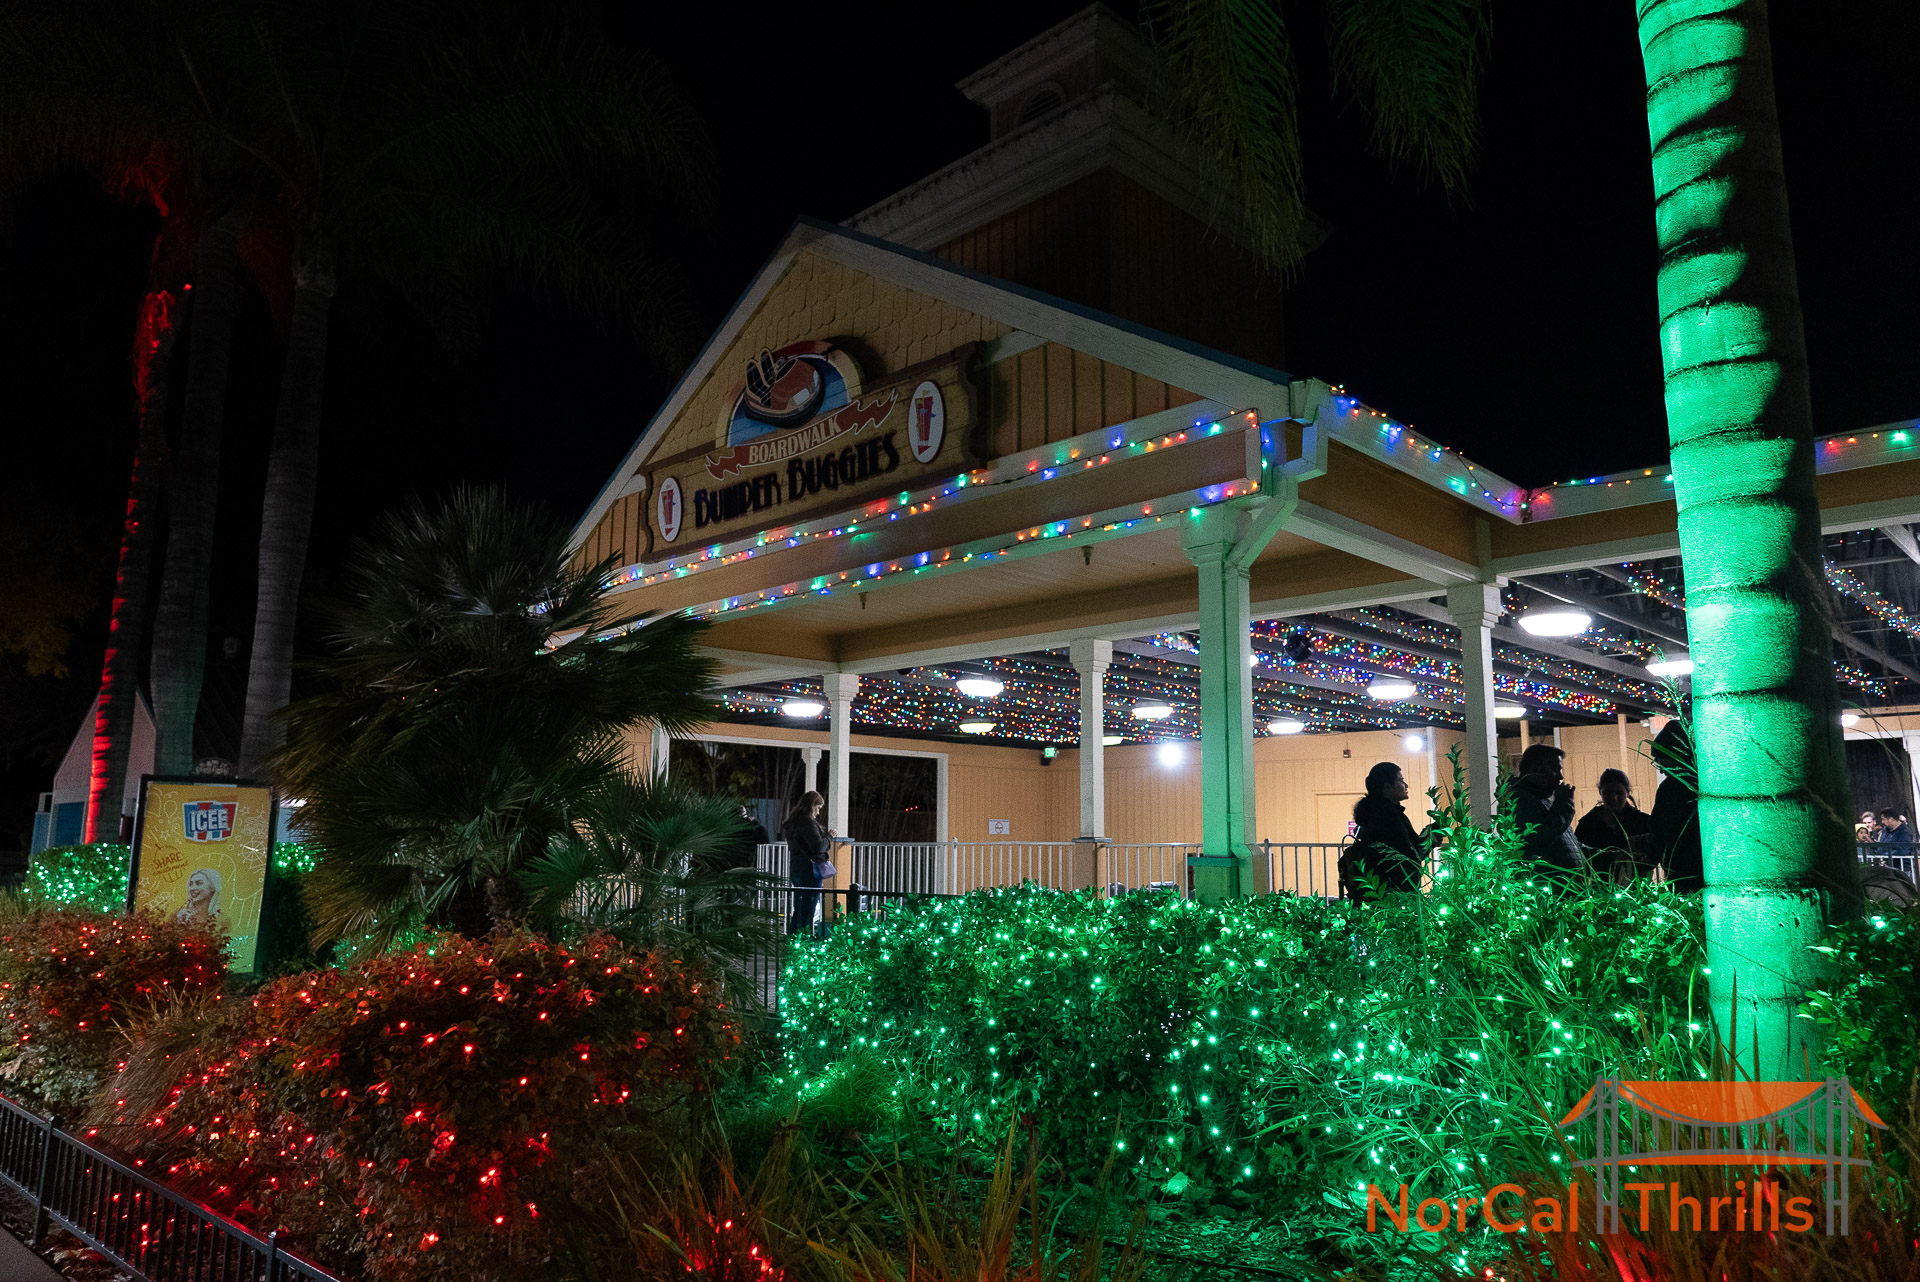 Holiday in the Park | Christmas Tree Plaza